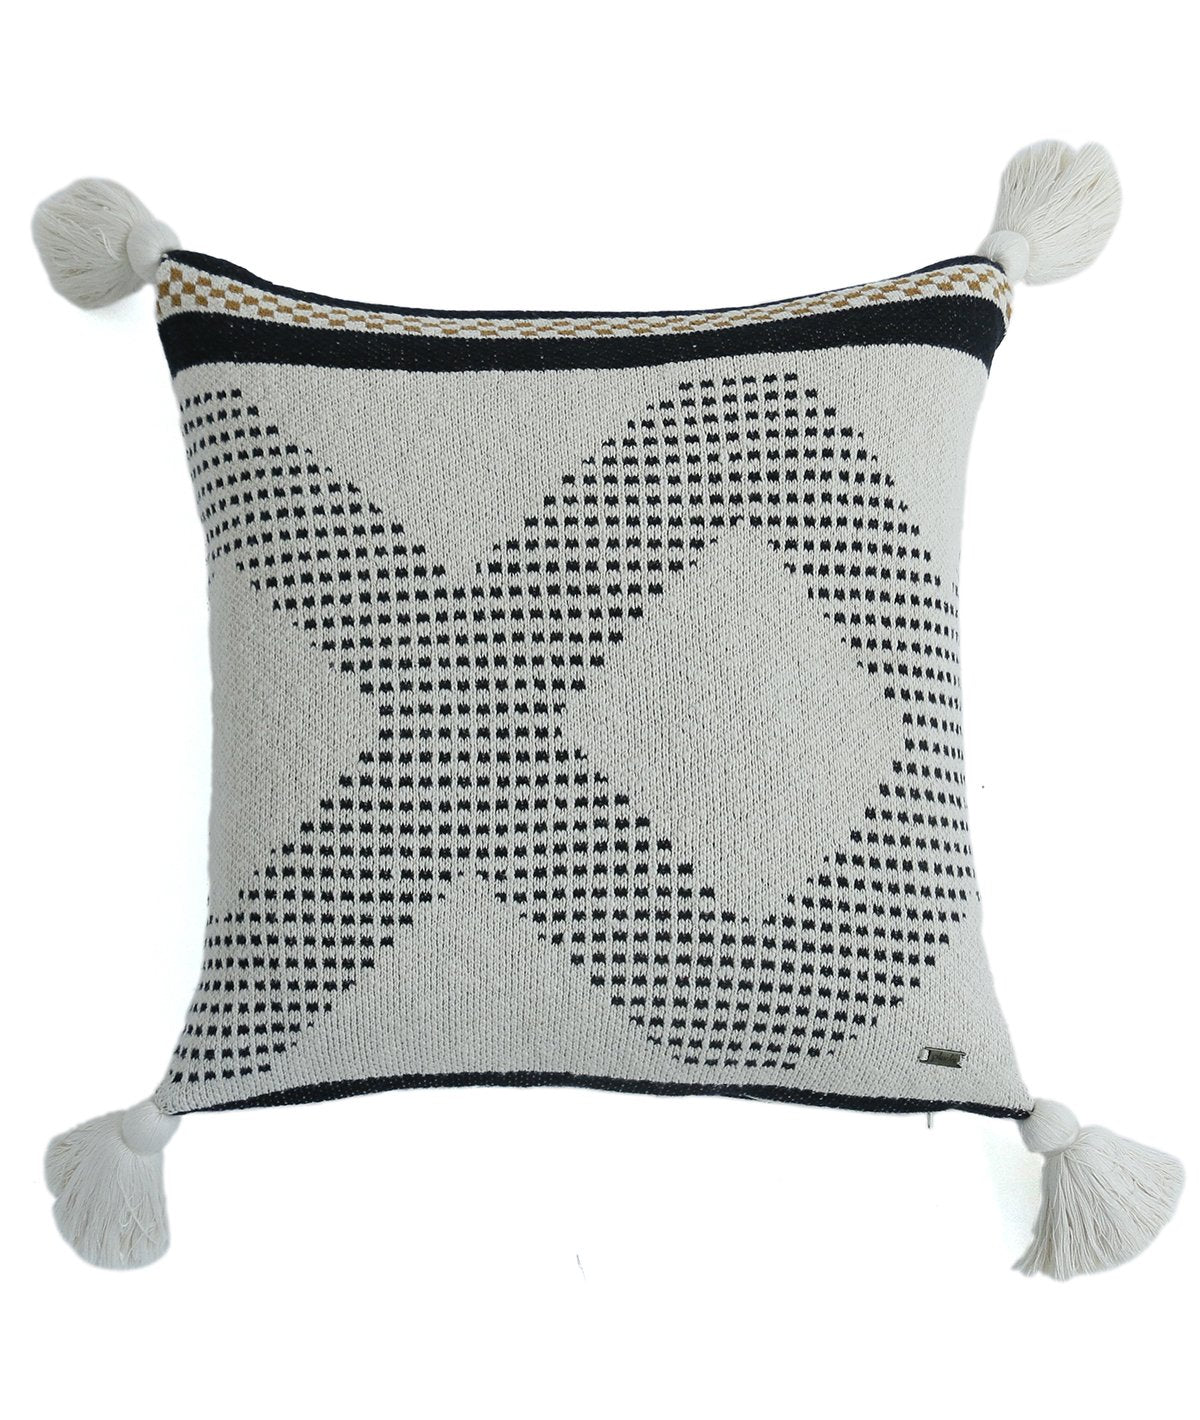 Diamond Check Cotton Knitted Decorative Black & Natural Color 18 x 18 Inches Cushion Cover